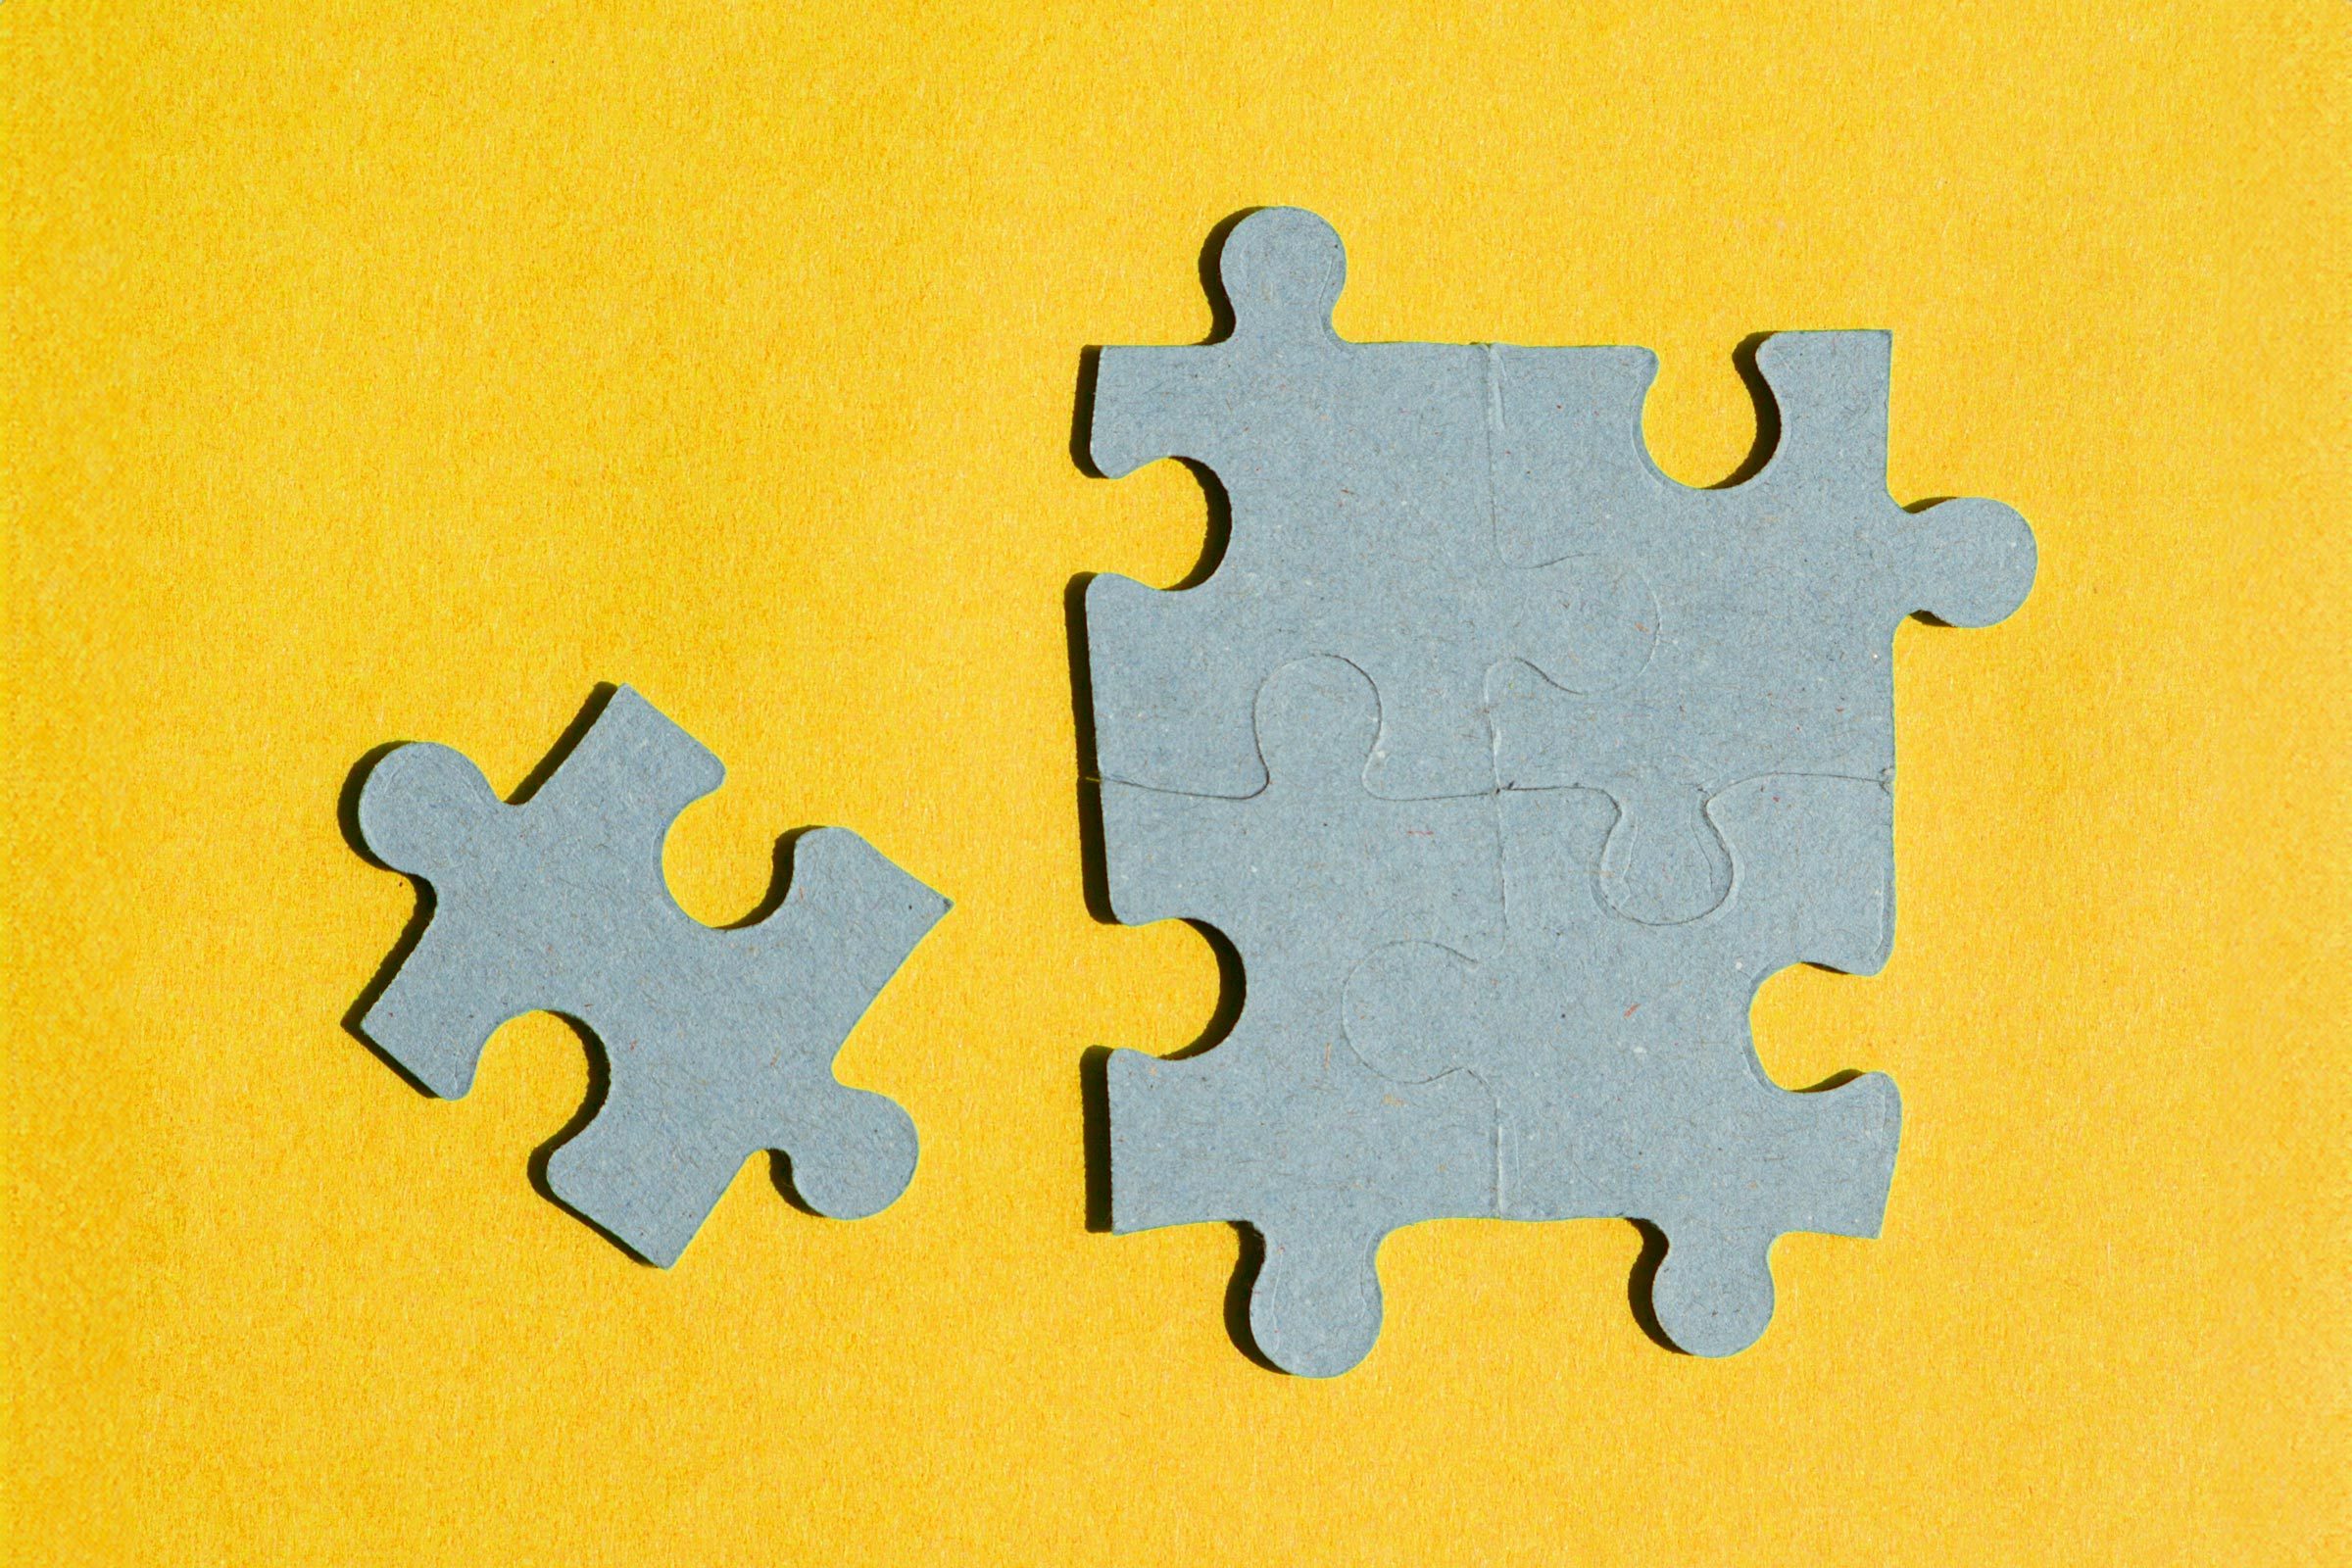 puzzle grain of the cardboard on the back of the puzzle piece